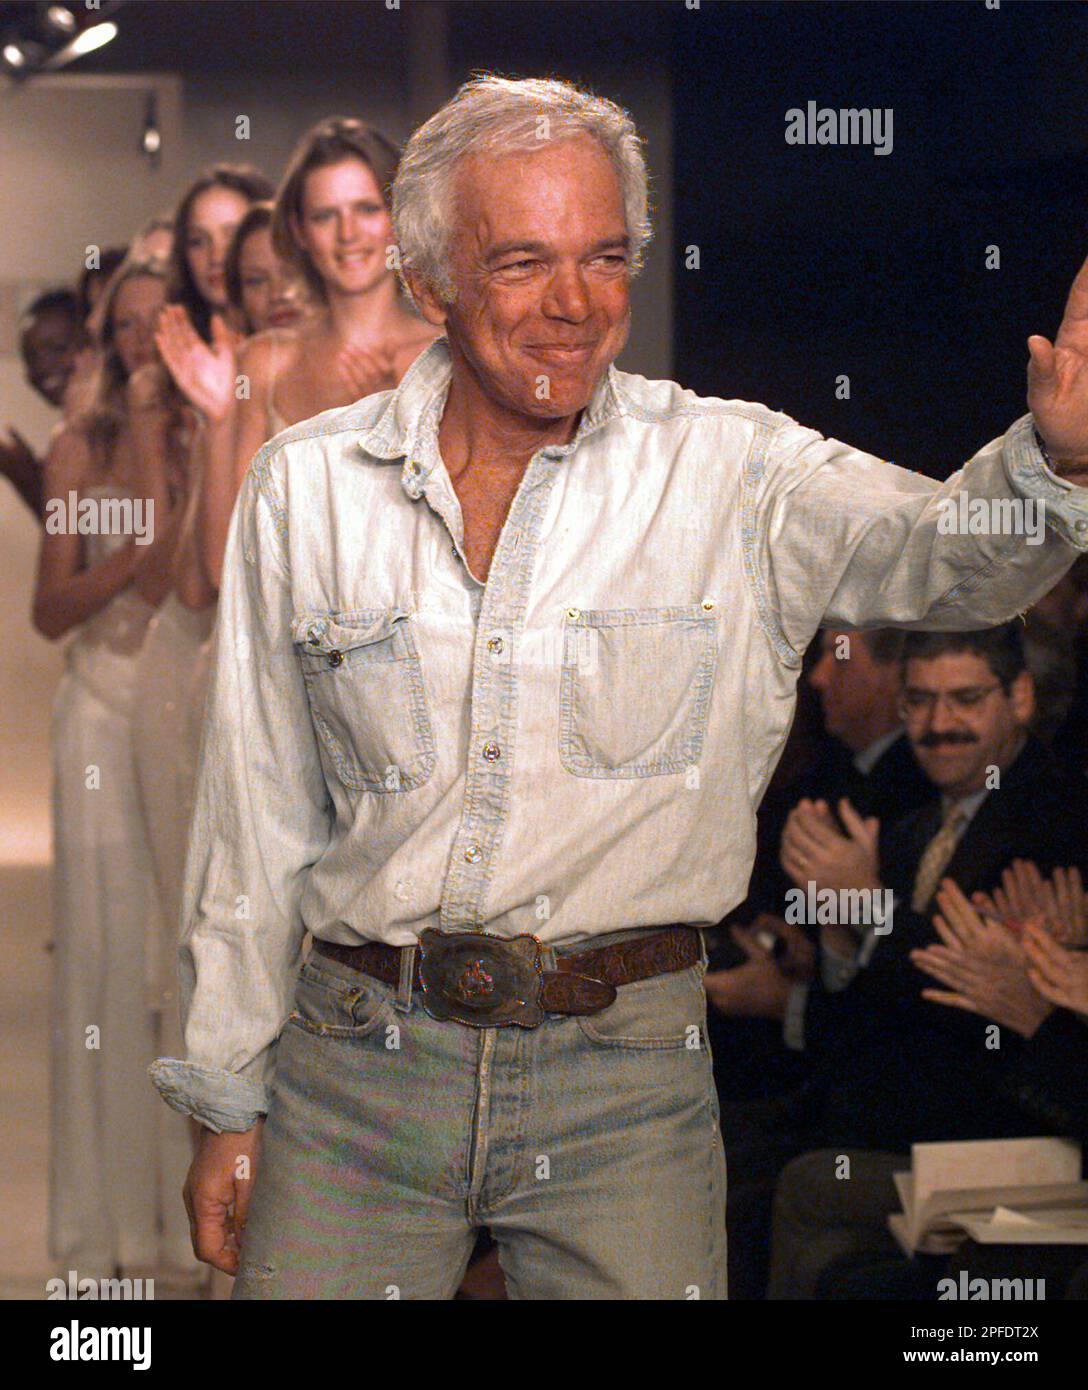 Designer Ralph Lauren acknowledges the audience's applause after the  showing of his spring 1998 fashion collection, in New York, Wednesday  morning, Nov. 5, 1997. (AP Photo/Richard Drew Stock Photo - Alamy